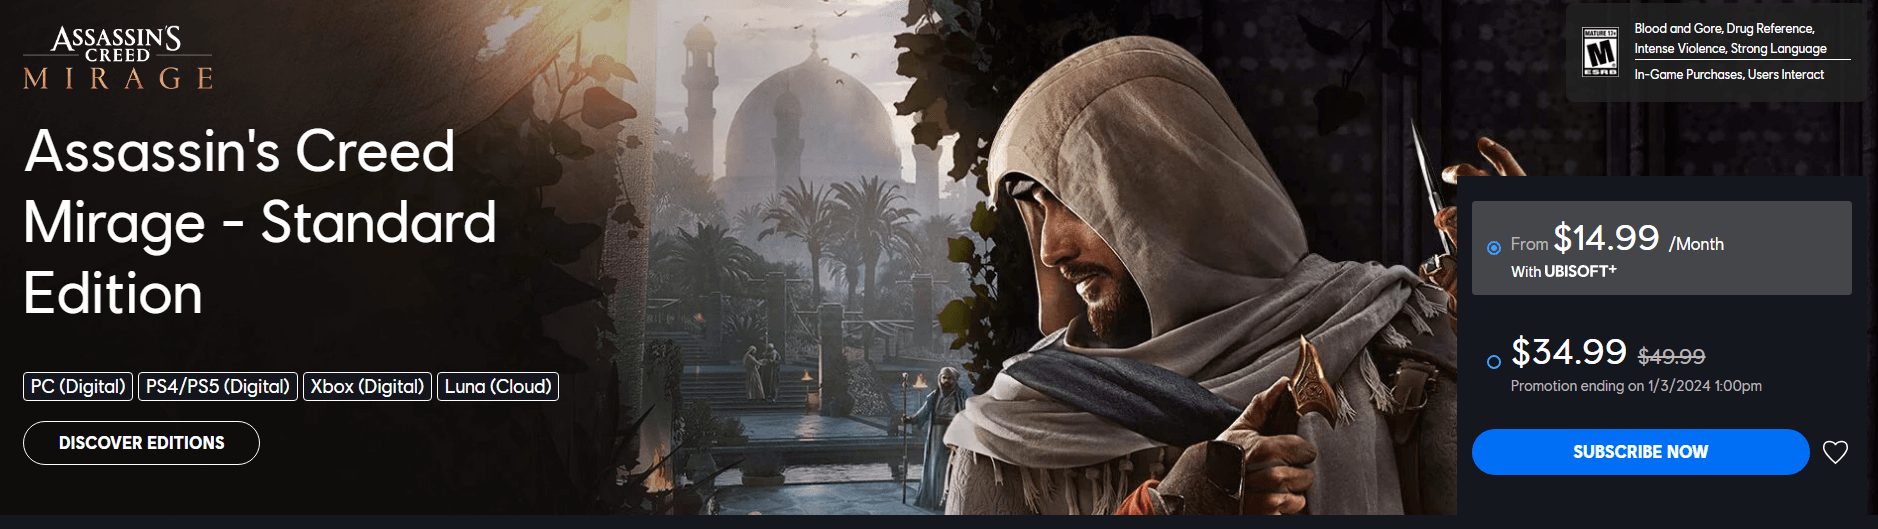 Assassin's Creed Mirage on the Ubisoft Store